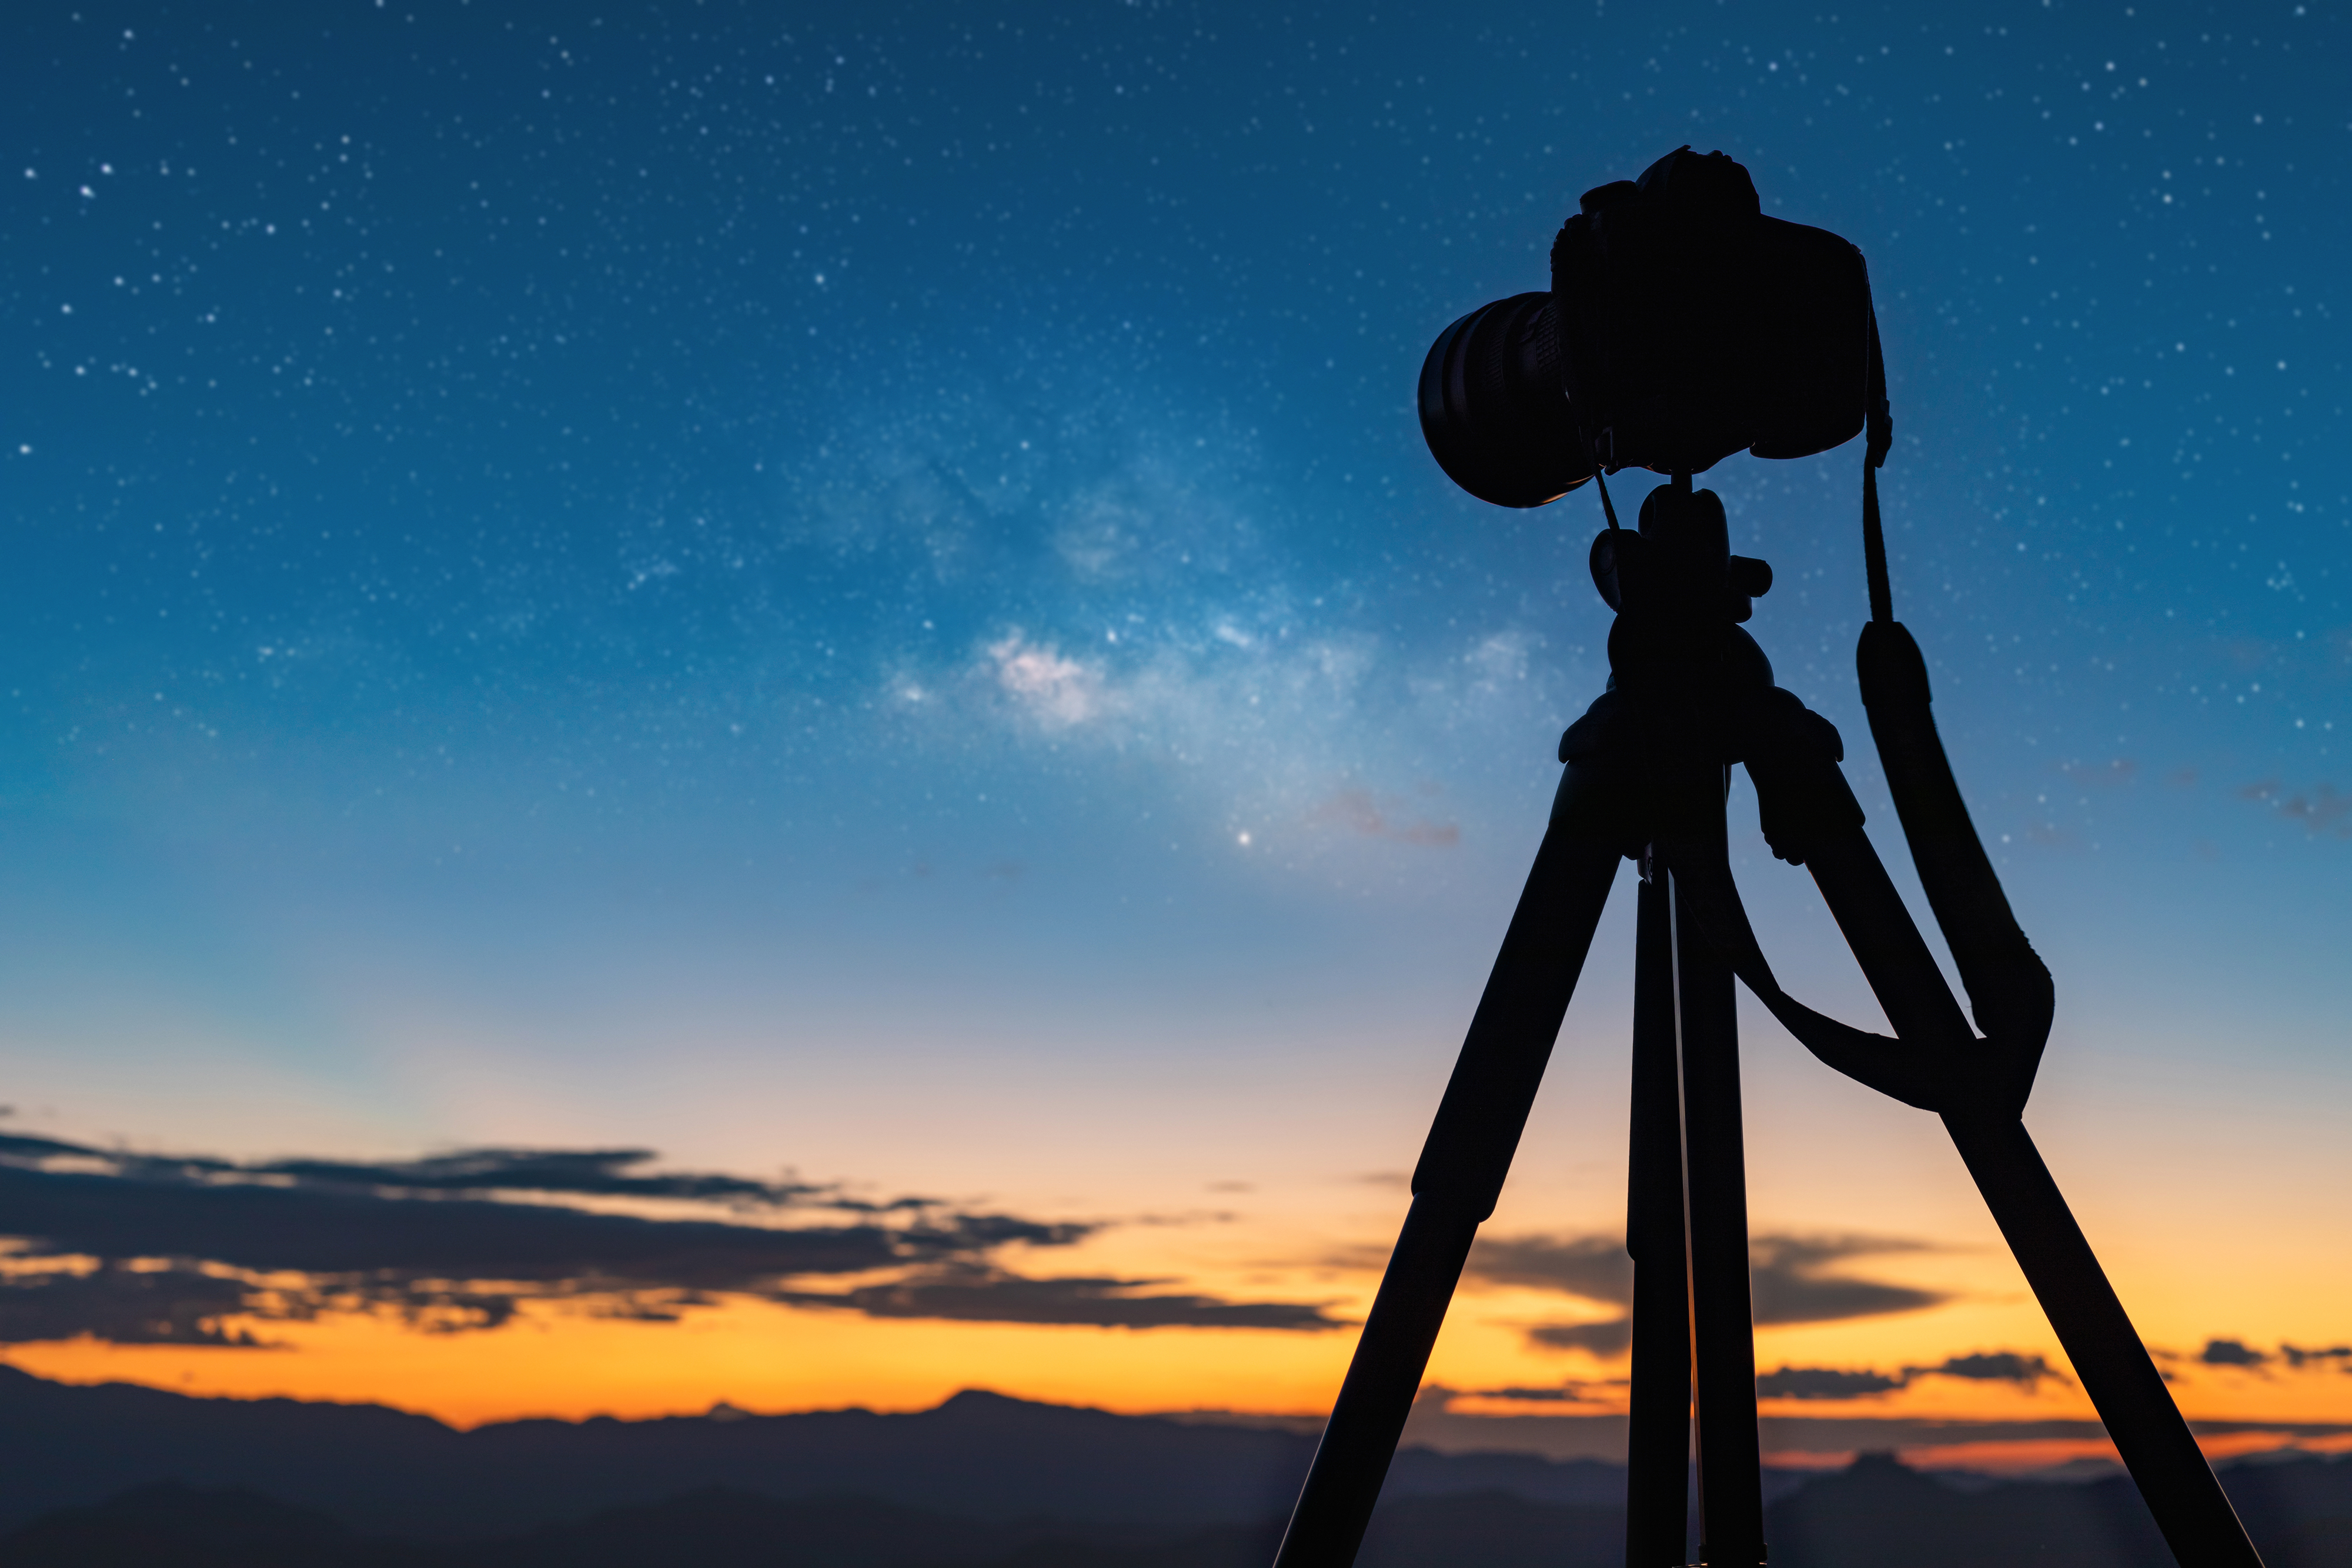 A DSLR on a tripod in front of a sunset